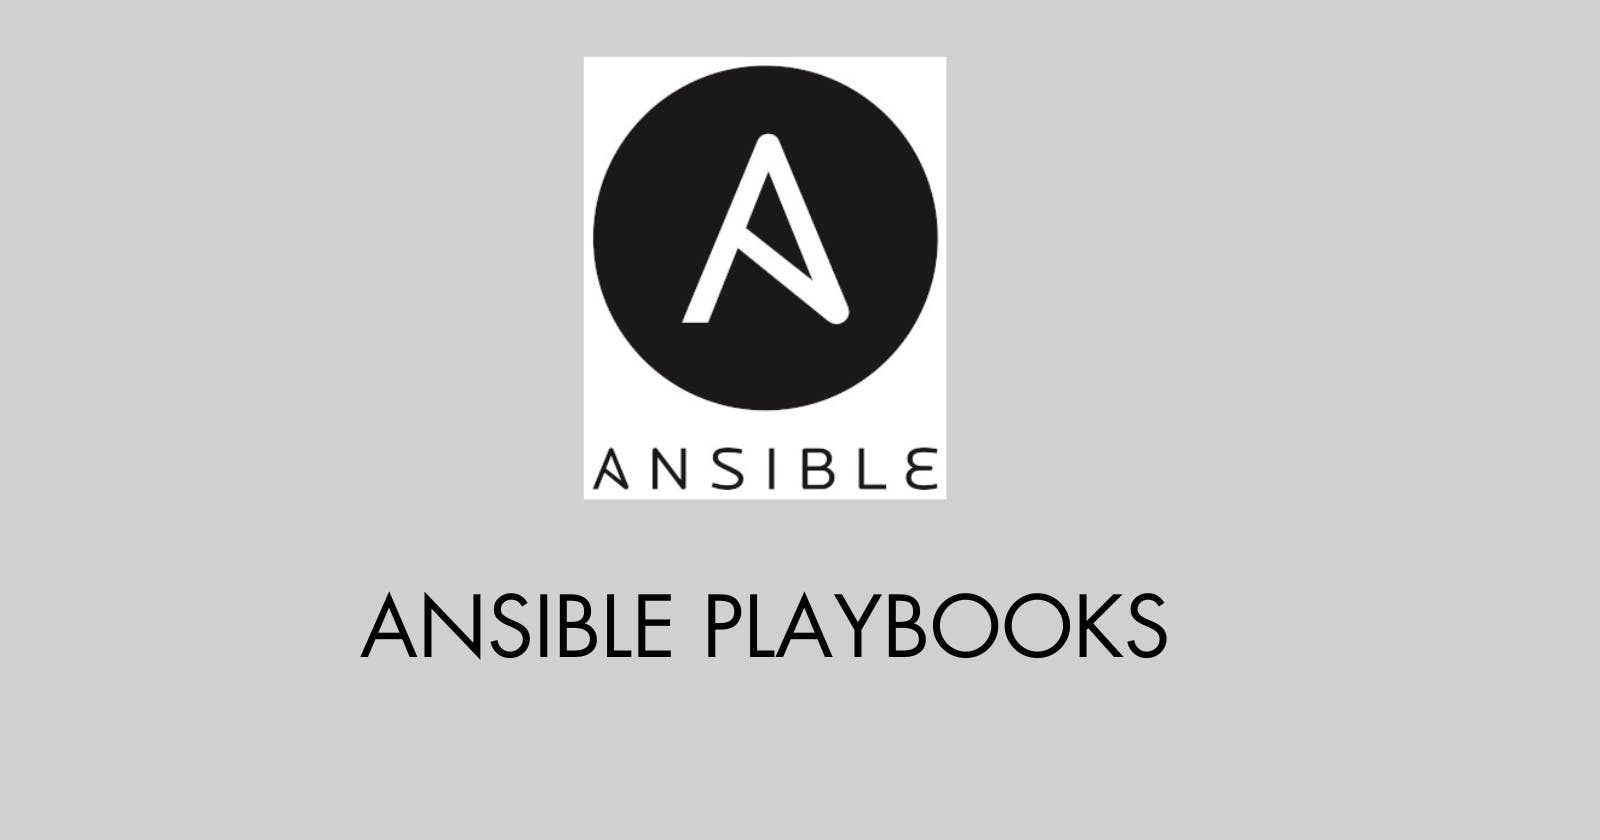 Day 43: Ansible Playbooks